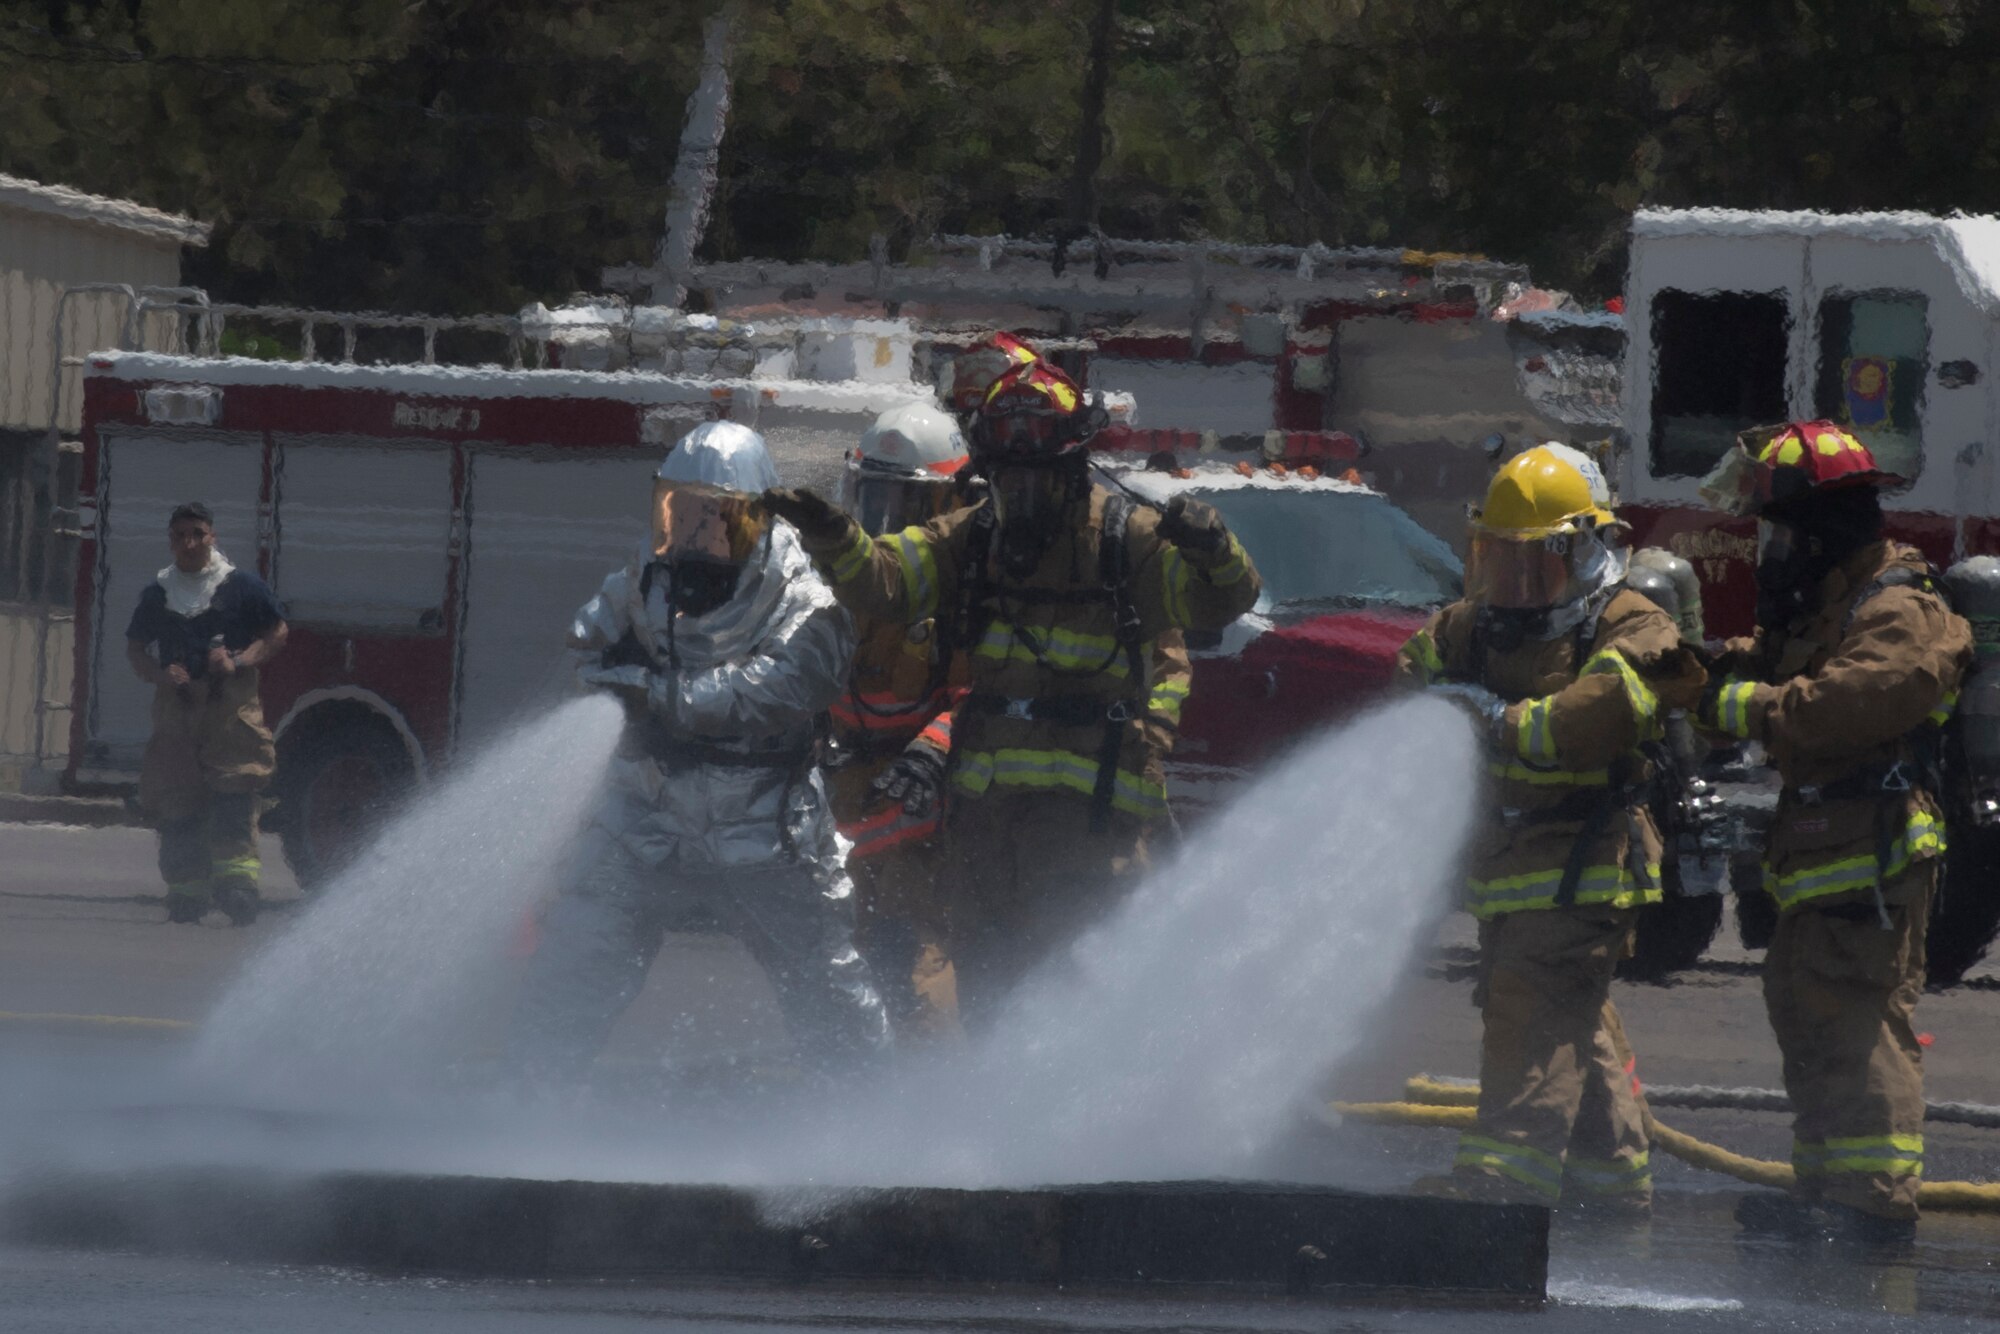 A team comprised of Central American firefighters douse a ground fire during the Central America Sharing Mutual Operational Knowledge and Experiences (CENTAM SMOKE) exercise, April 1, 2019, at Soto Cano Air Base, Honduras. CENTAM SMOKE brought together firefighters from Honduras, Costa Rica, Belize, Guatemala and El Salvador to train with U.S. Air Force members as well as develop bonds and understandings of one another’s culture with team building exercises. The weeklong training included aircraft and structural fires, vehicle extrication, and a firefighter combat challenge. (U.S. Air Force photo by Staff Sgt. Eric Summers Jr.)